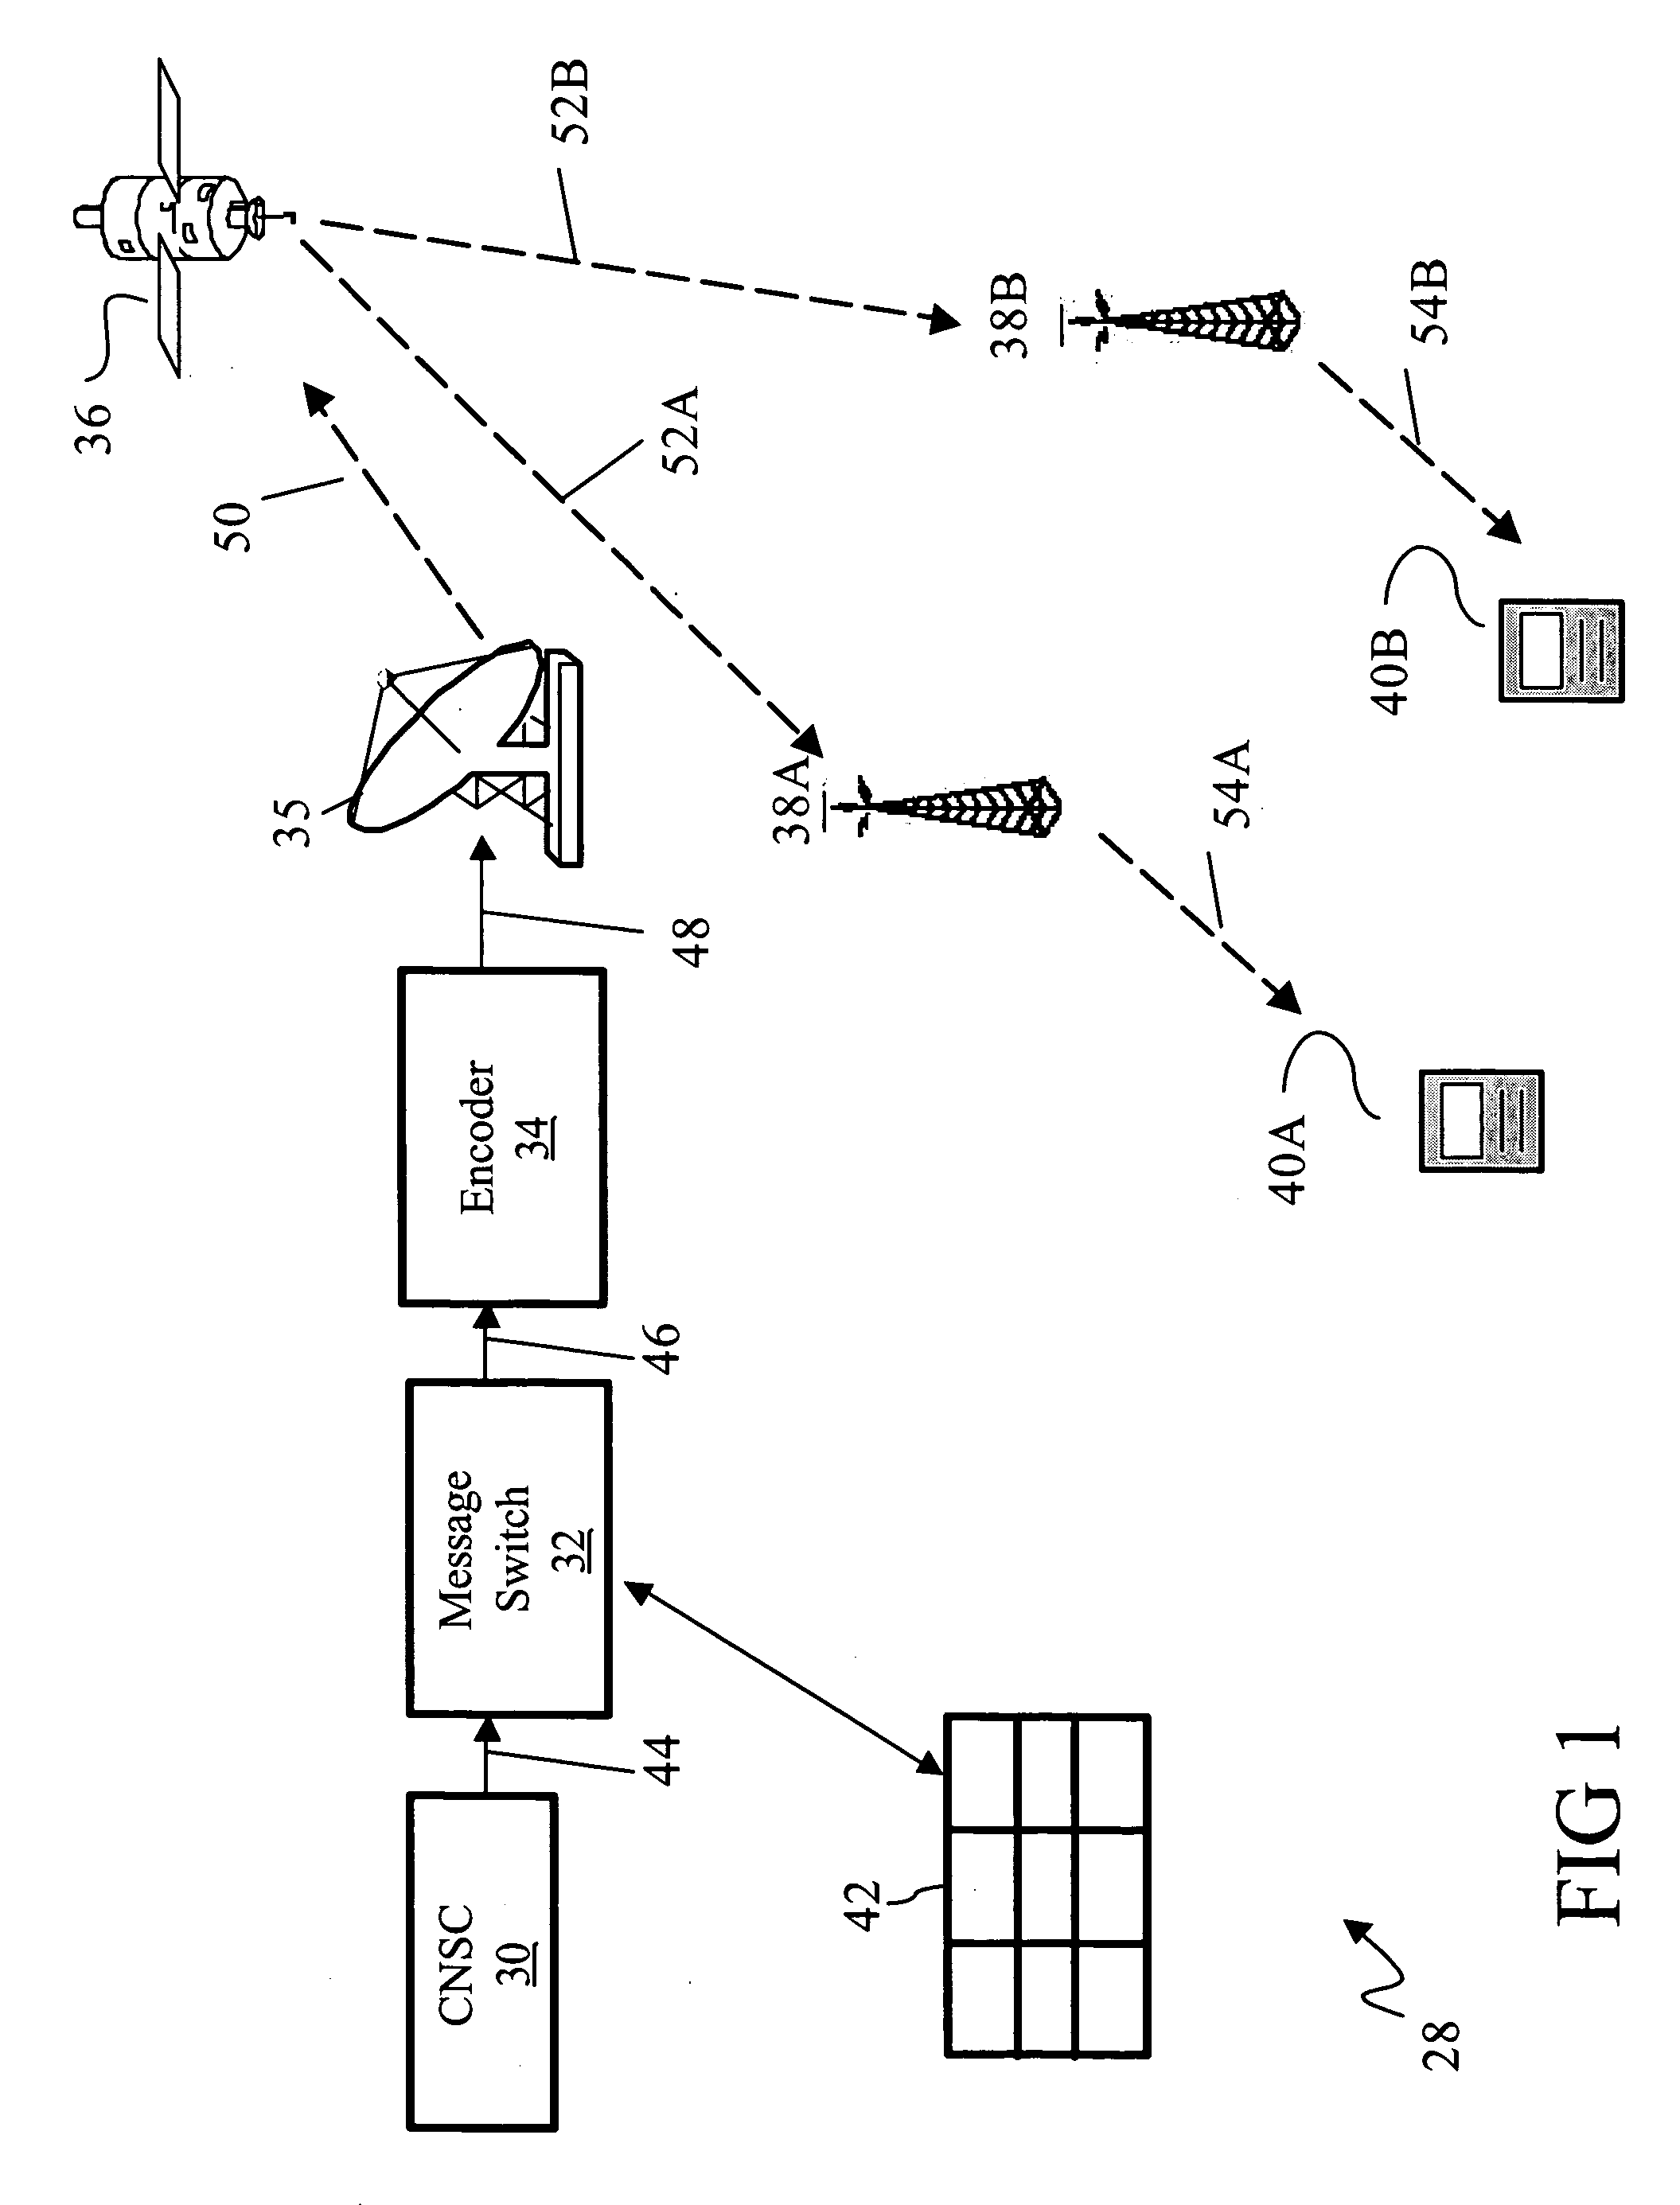 System, apparatus and method for wireless notification